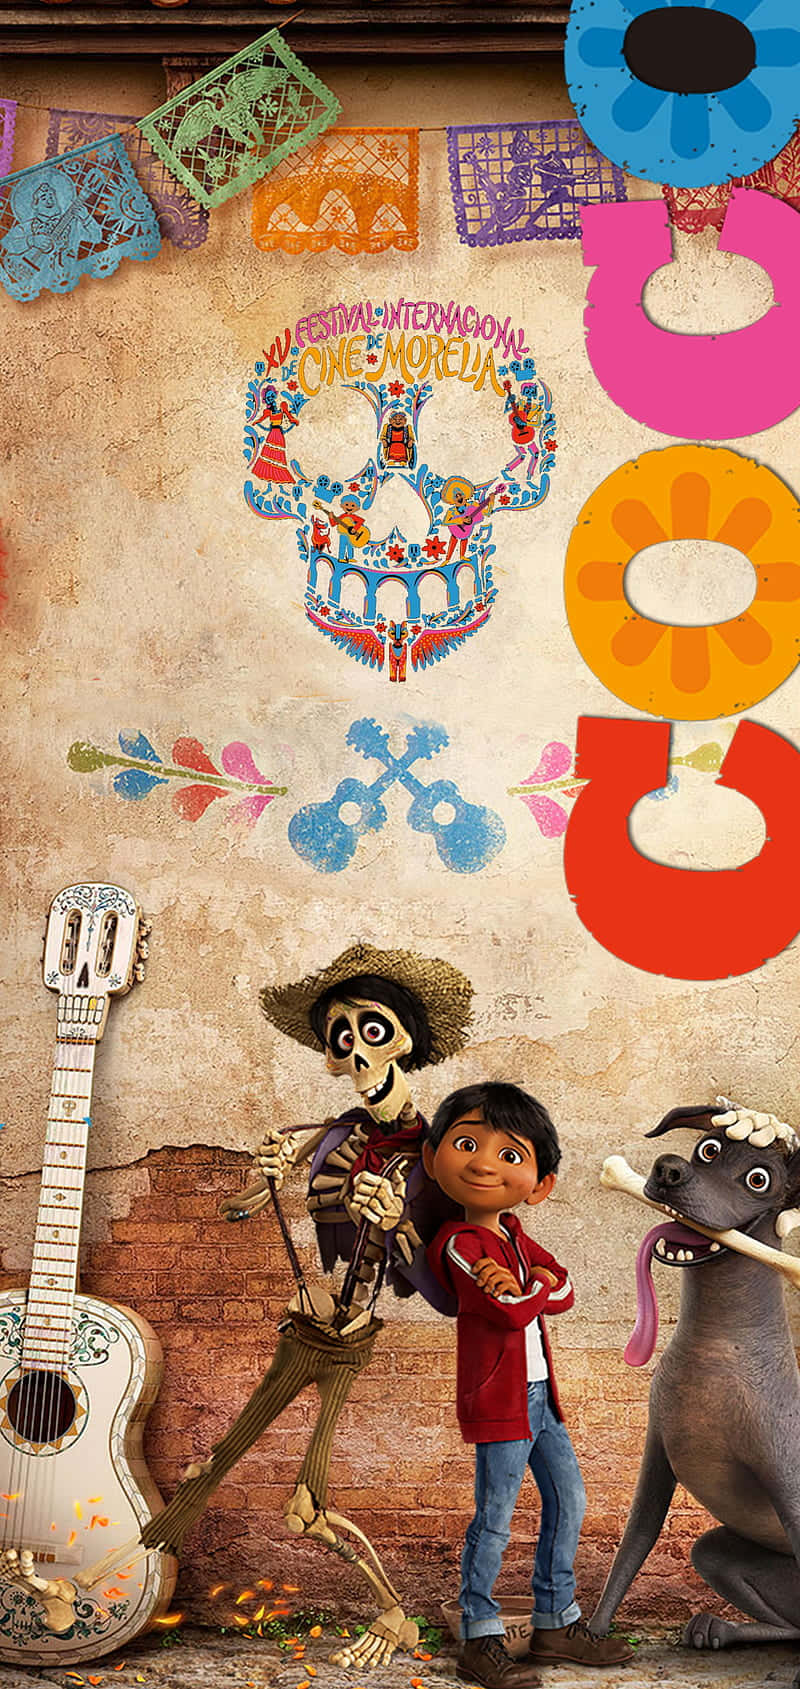 Explore the world of Coco and experience music, joy, and life!